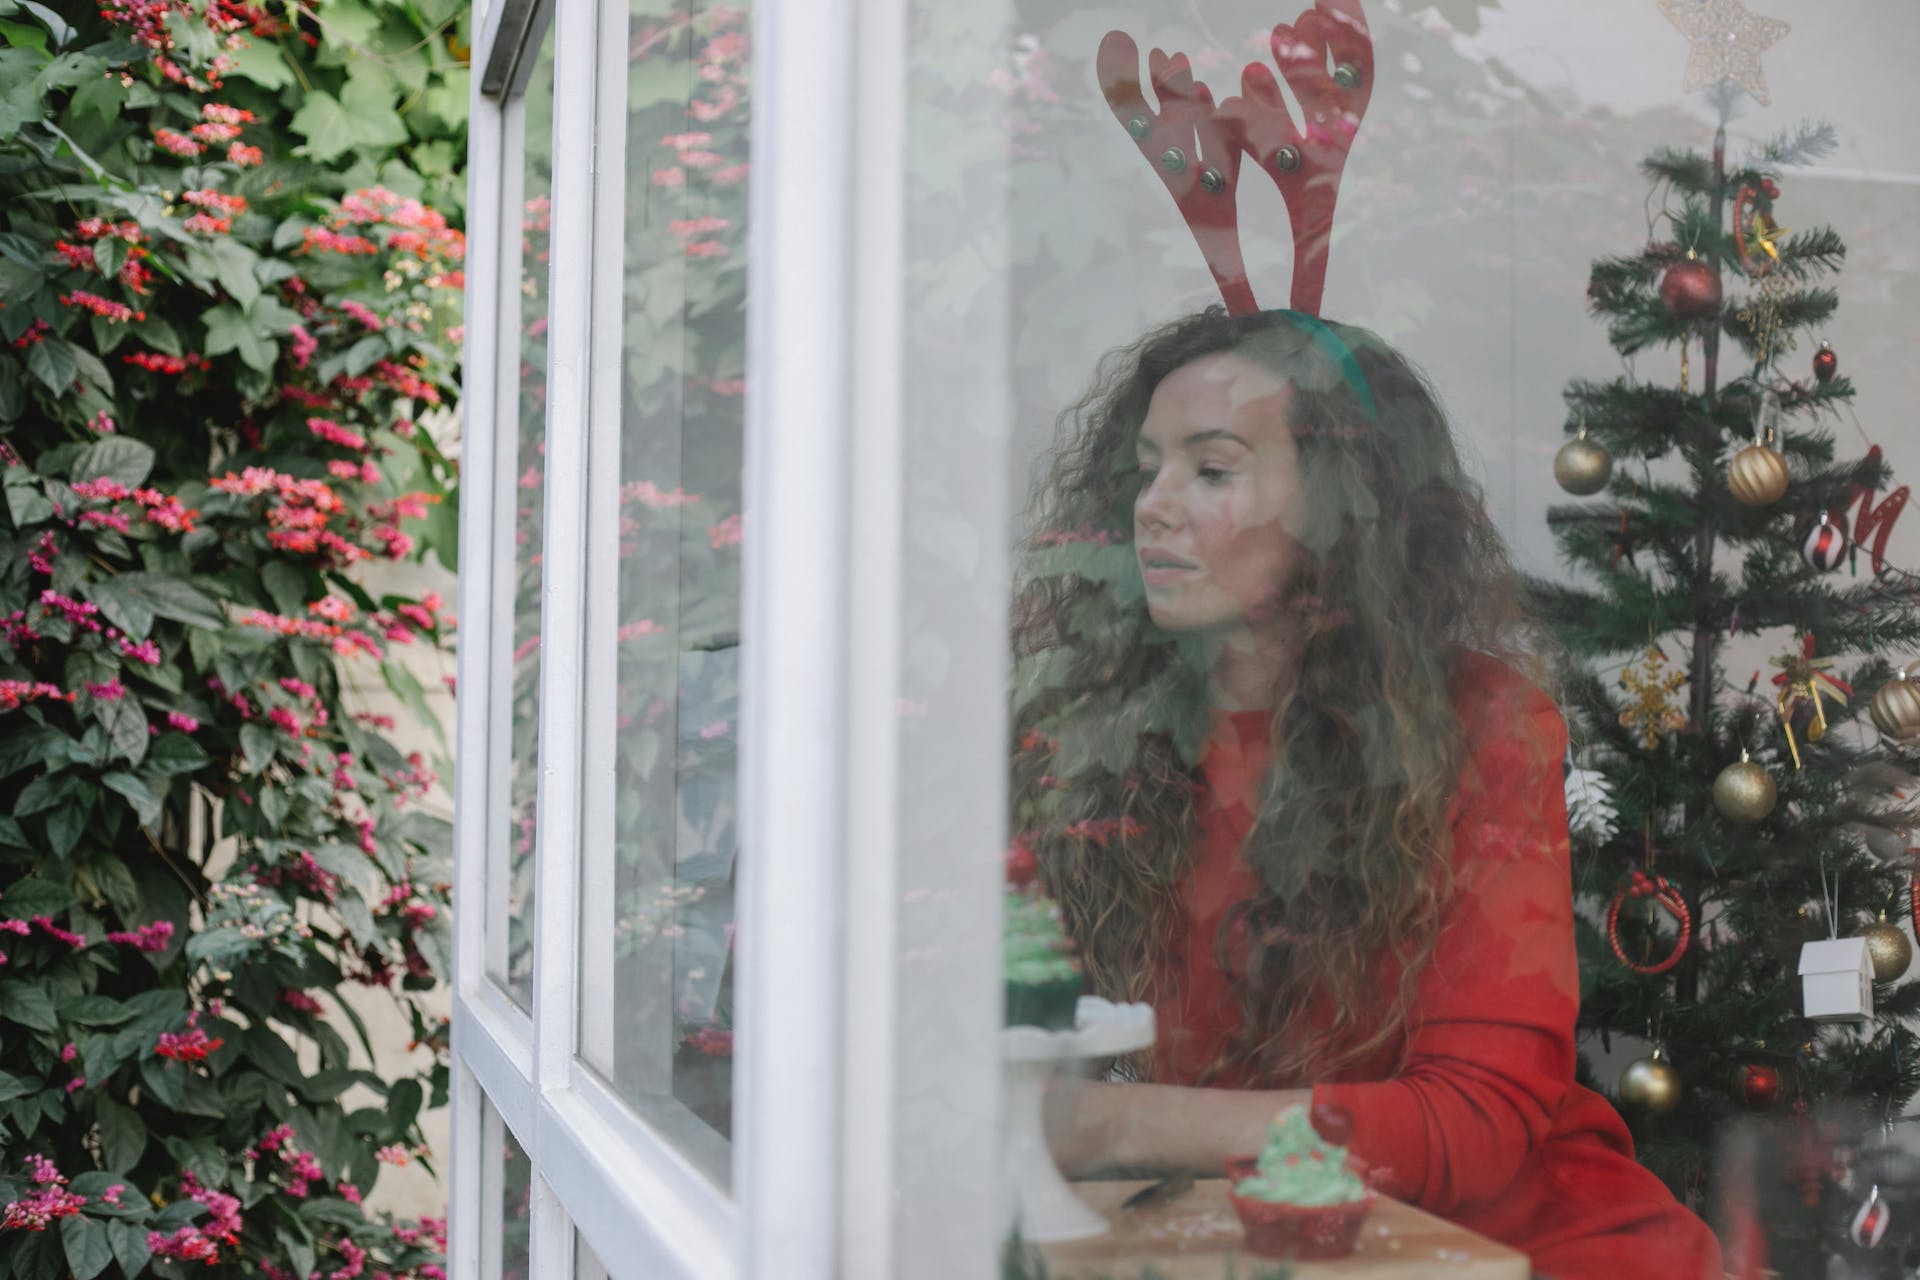 A sad woman looking outside while sitting beside a Christmas tree | Source: Pexels